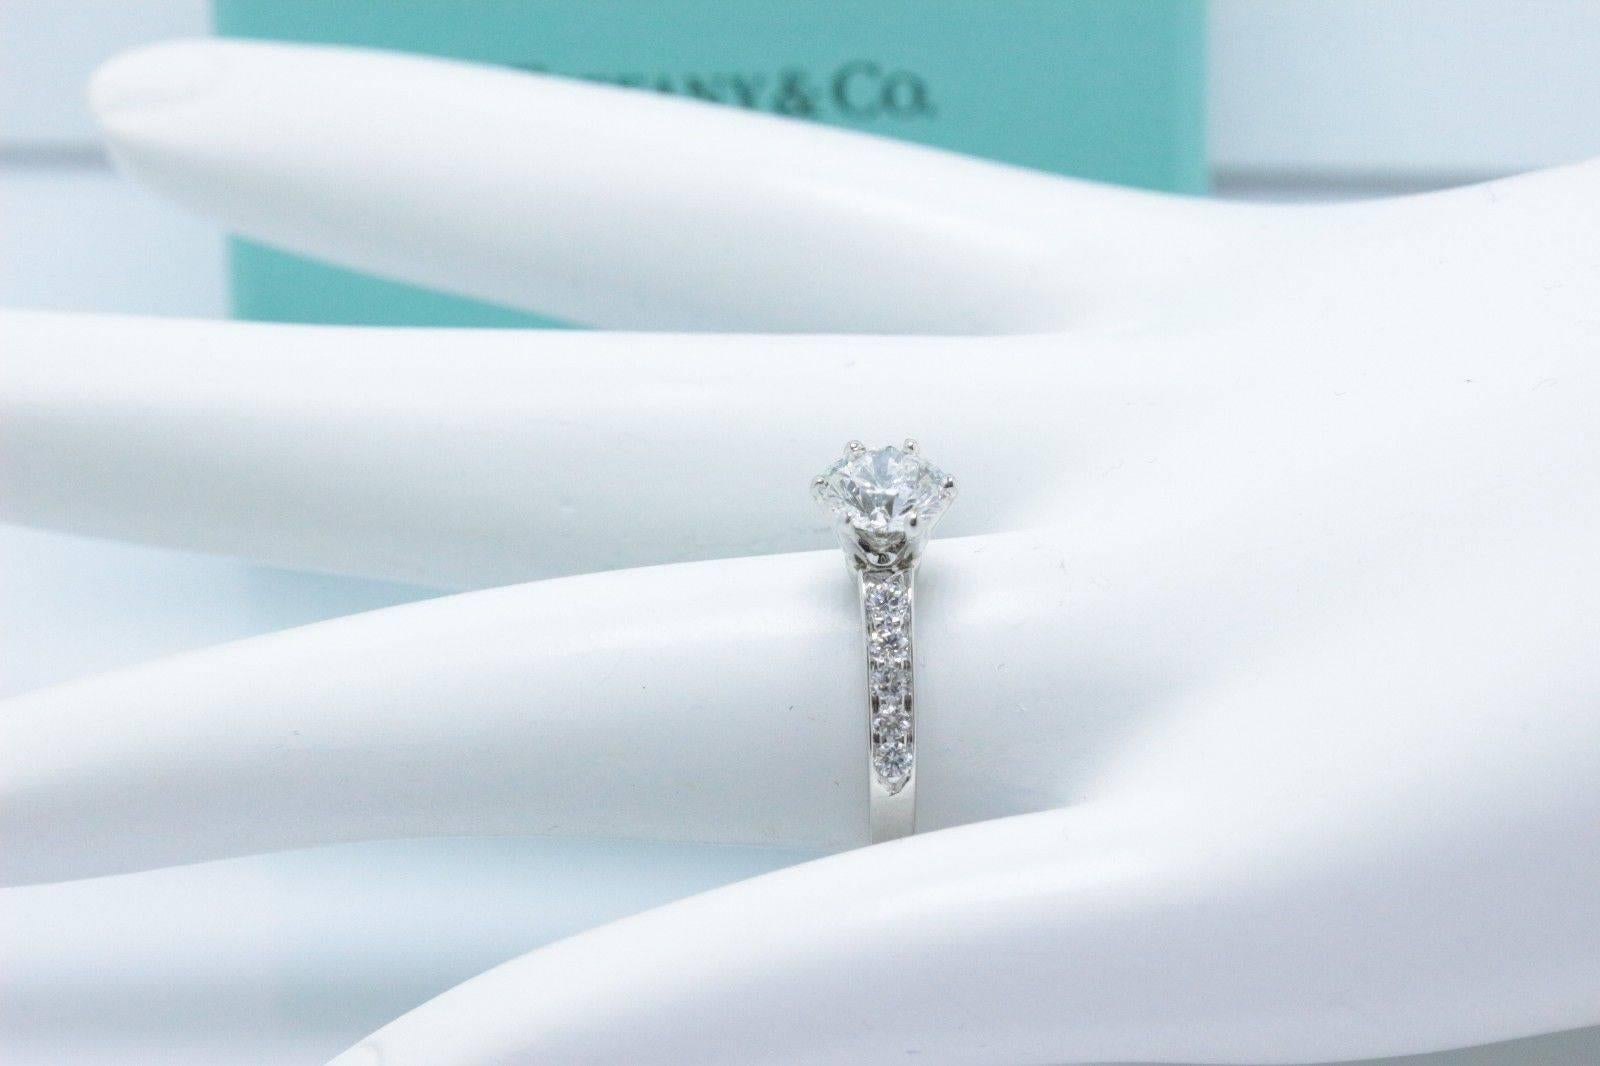 Tiffany & Co 
Bead Set Diamond Engagement Ring in Platinum.  
The Center Diamond is a Round Brilliant 1.00 CTS F color, VVS1 clarity.  
There are 10 Round Brilliant Diamonds Bead Set on the band of the ring... 0.27 TCW F color, VS1 clarity. 